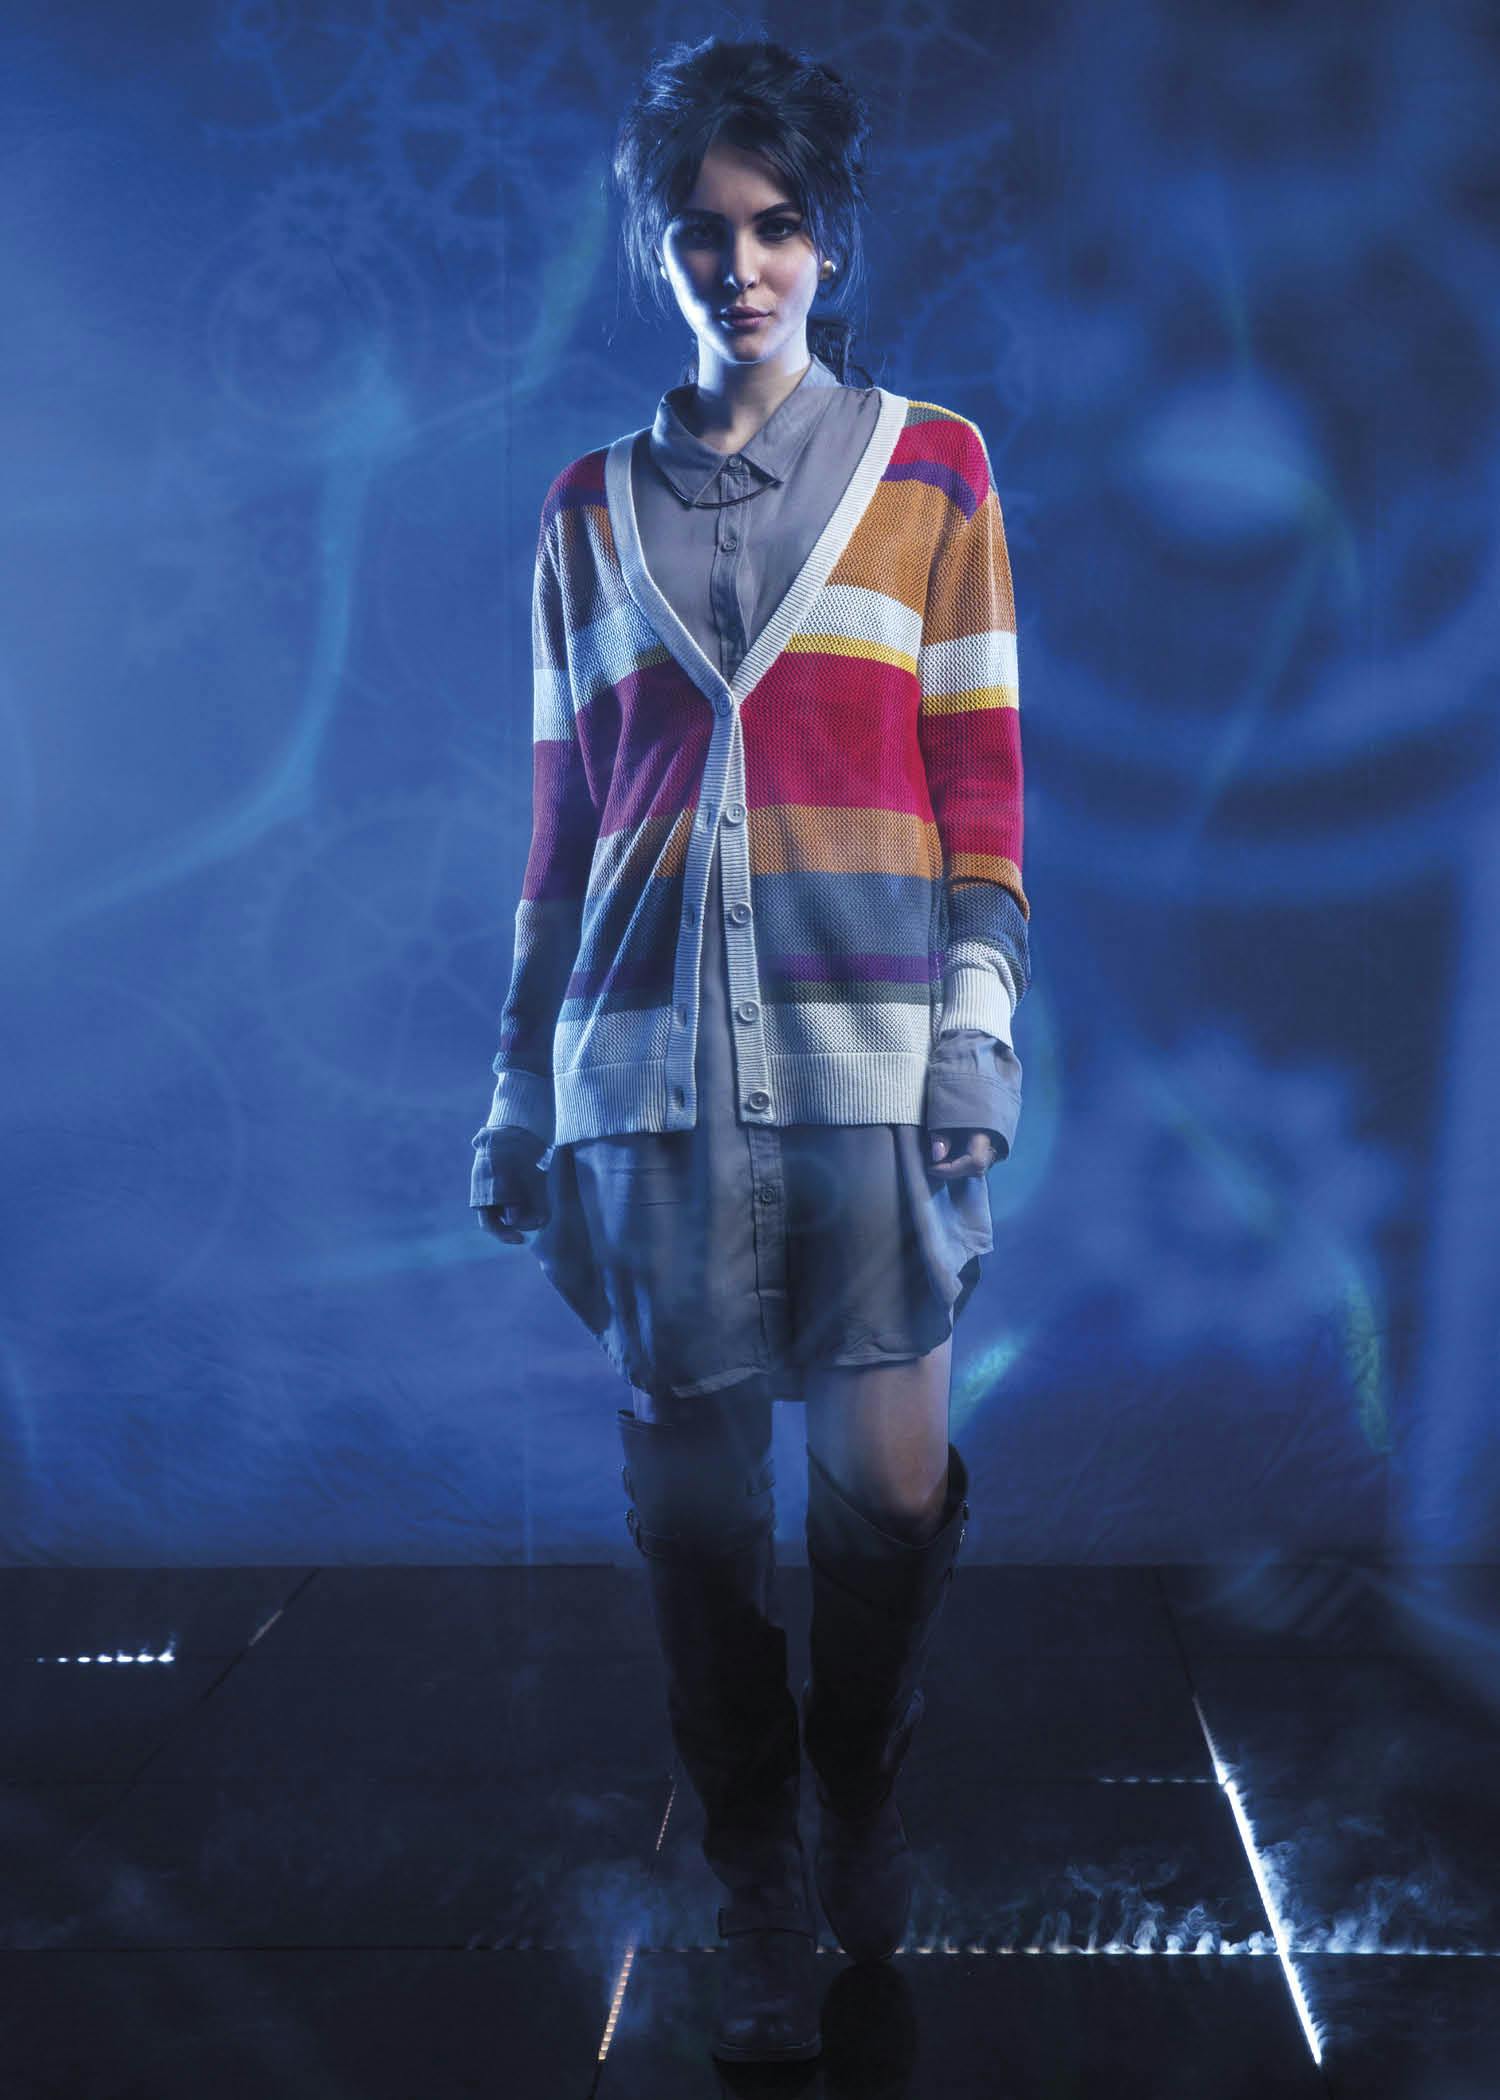 Fourth Doctor Striped Cardigan: $48.50 at select Hot Topic stores and HotTopic.com